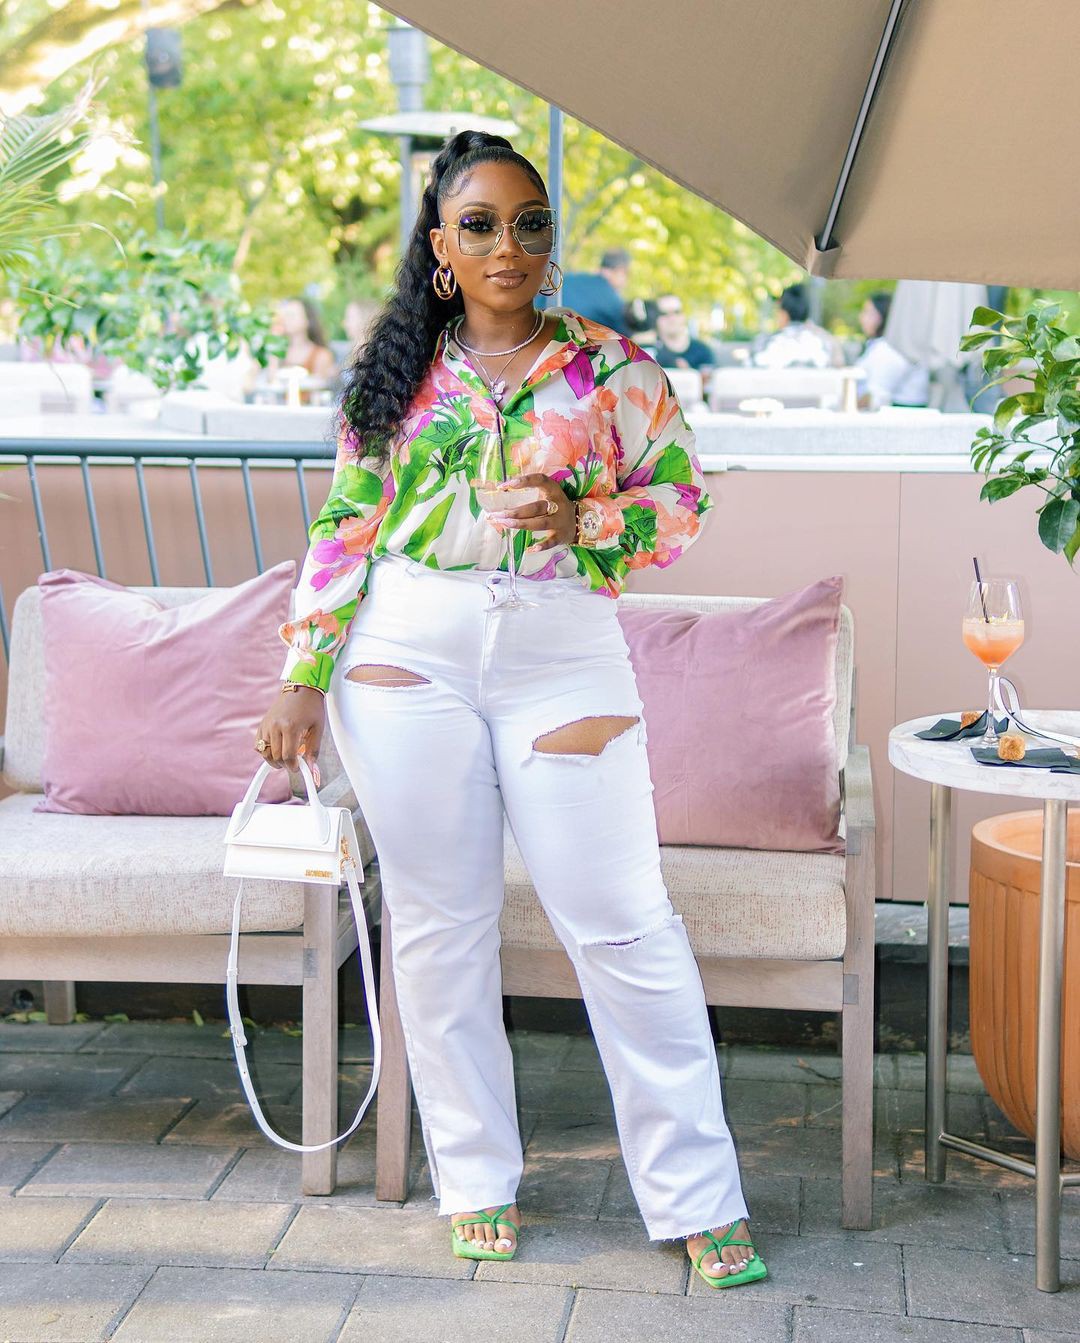 How to Wear White Pants: The Shortcut to Summer Style 